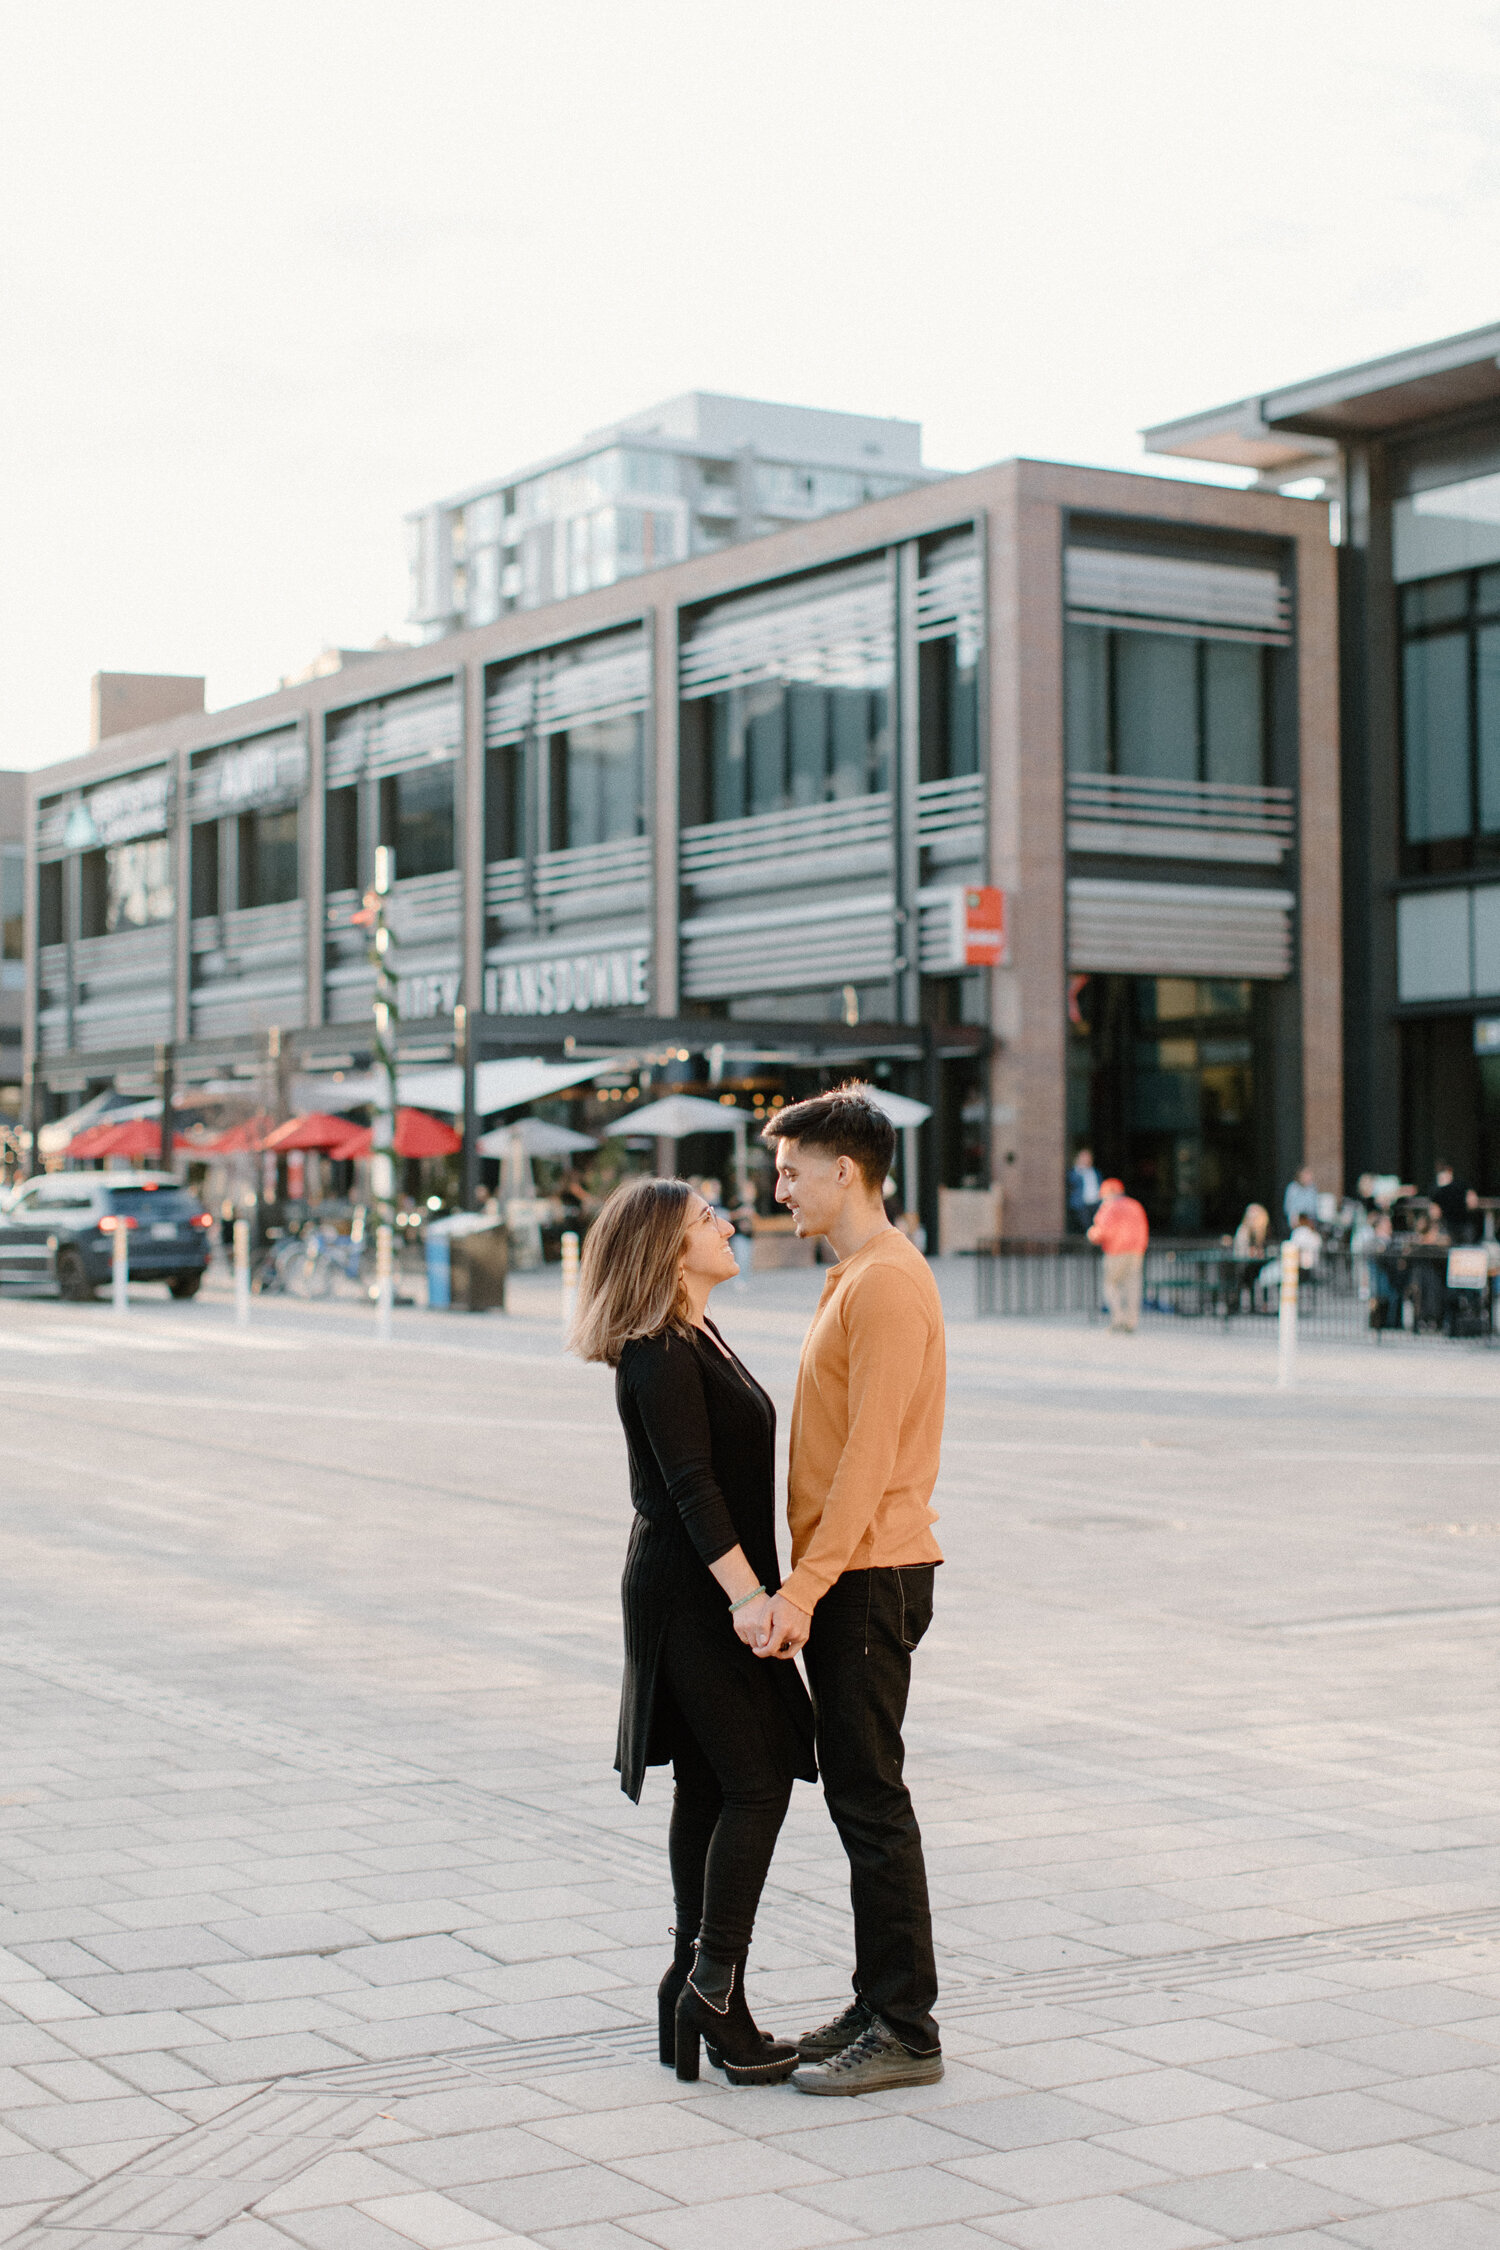  Ottawa, Canada photographer, Chelsea Mason Photography captures this couple holding hands in an urban setting during their engagement session. black and orange family photo outfit color scheme engagement outfit inspiration couple holding hands and l